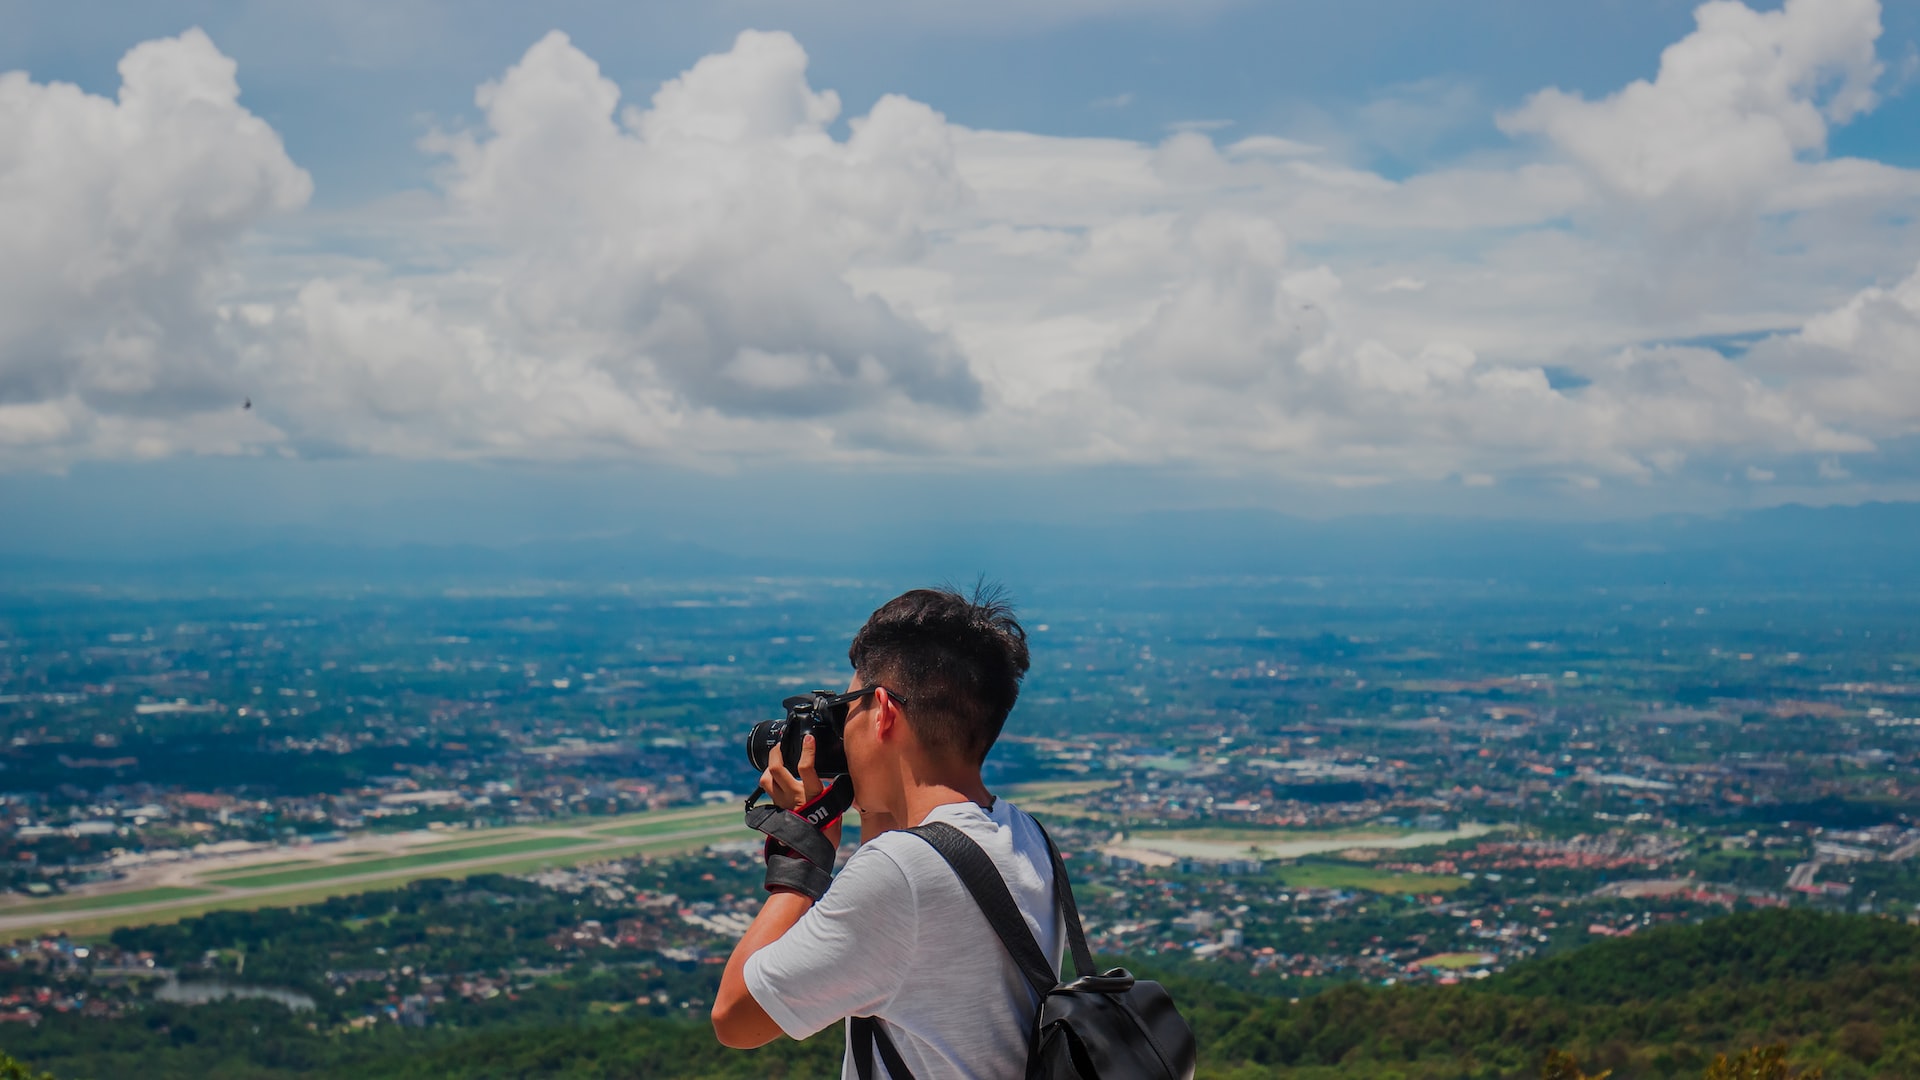 A tourist in Chiang Mai with the city's airport in the background